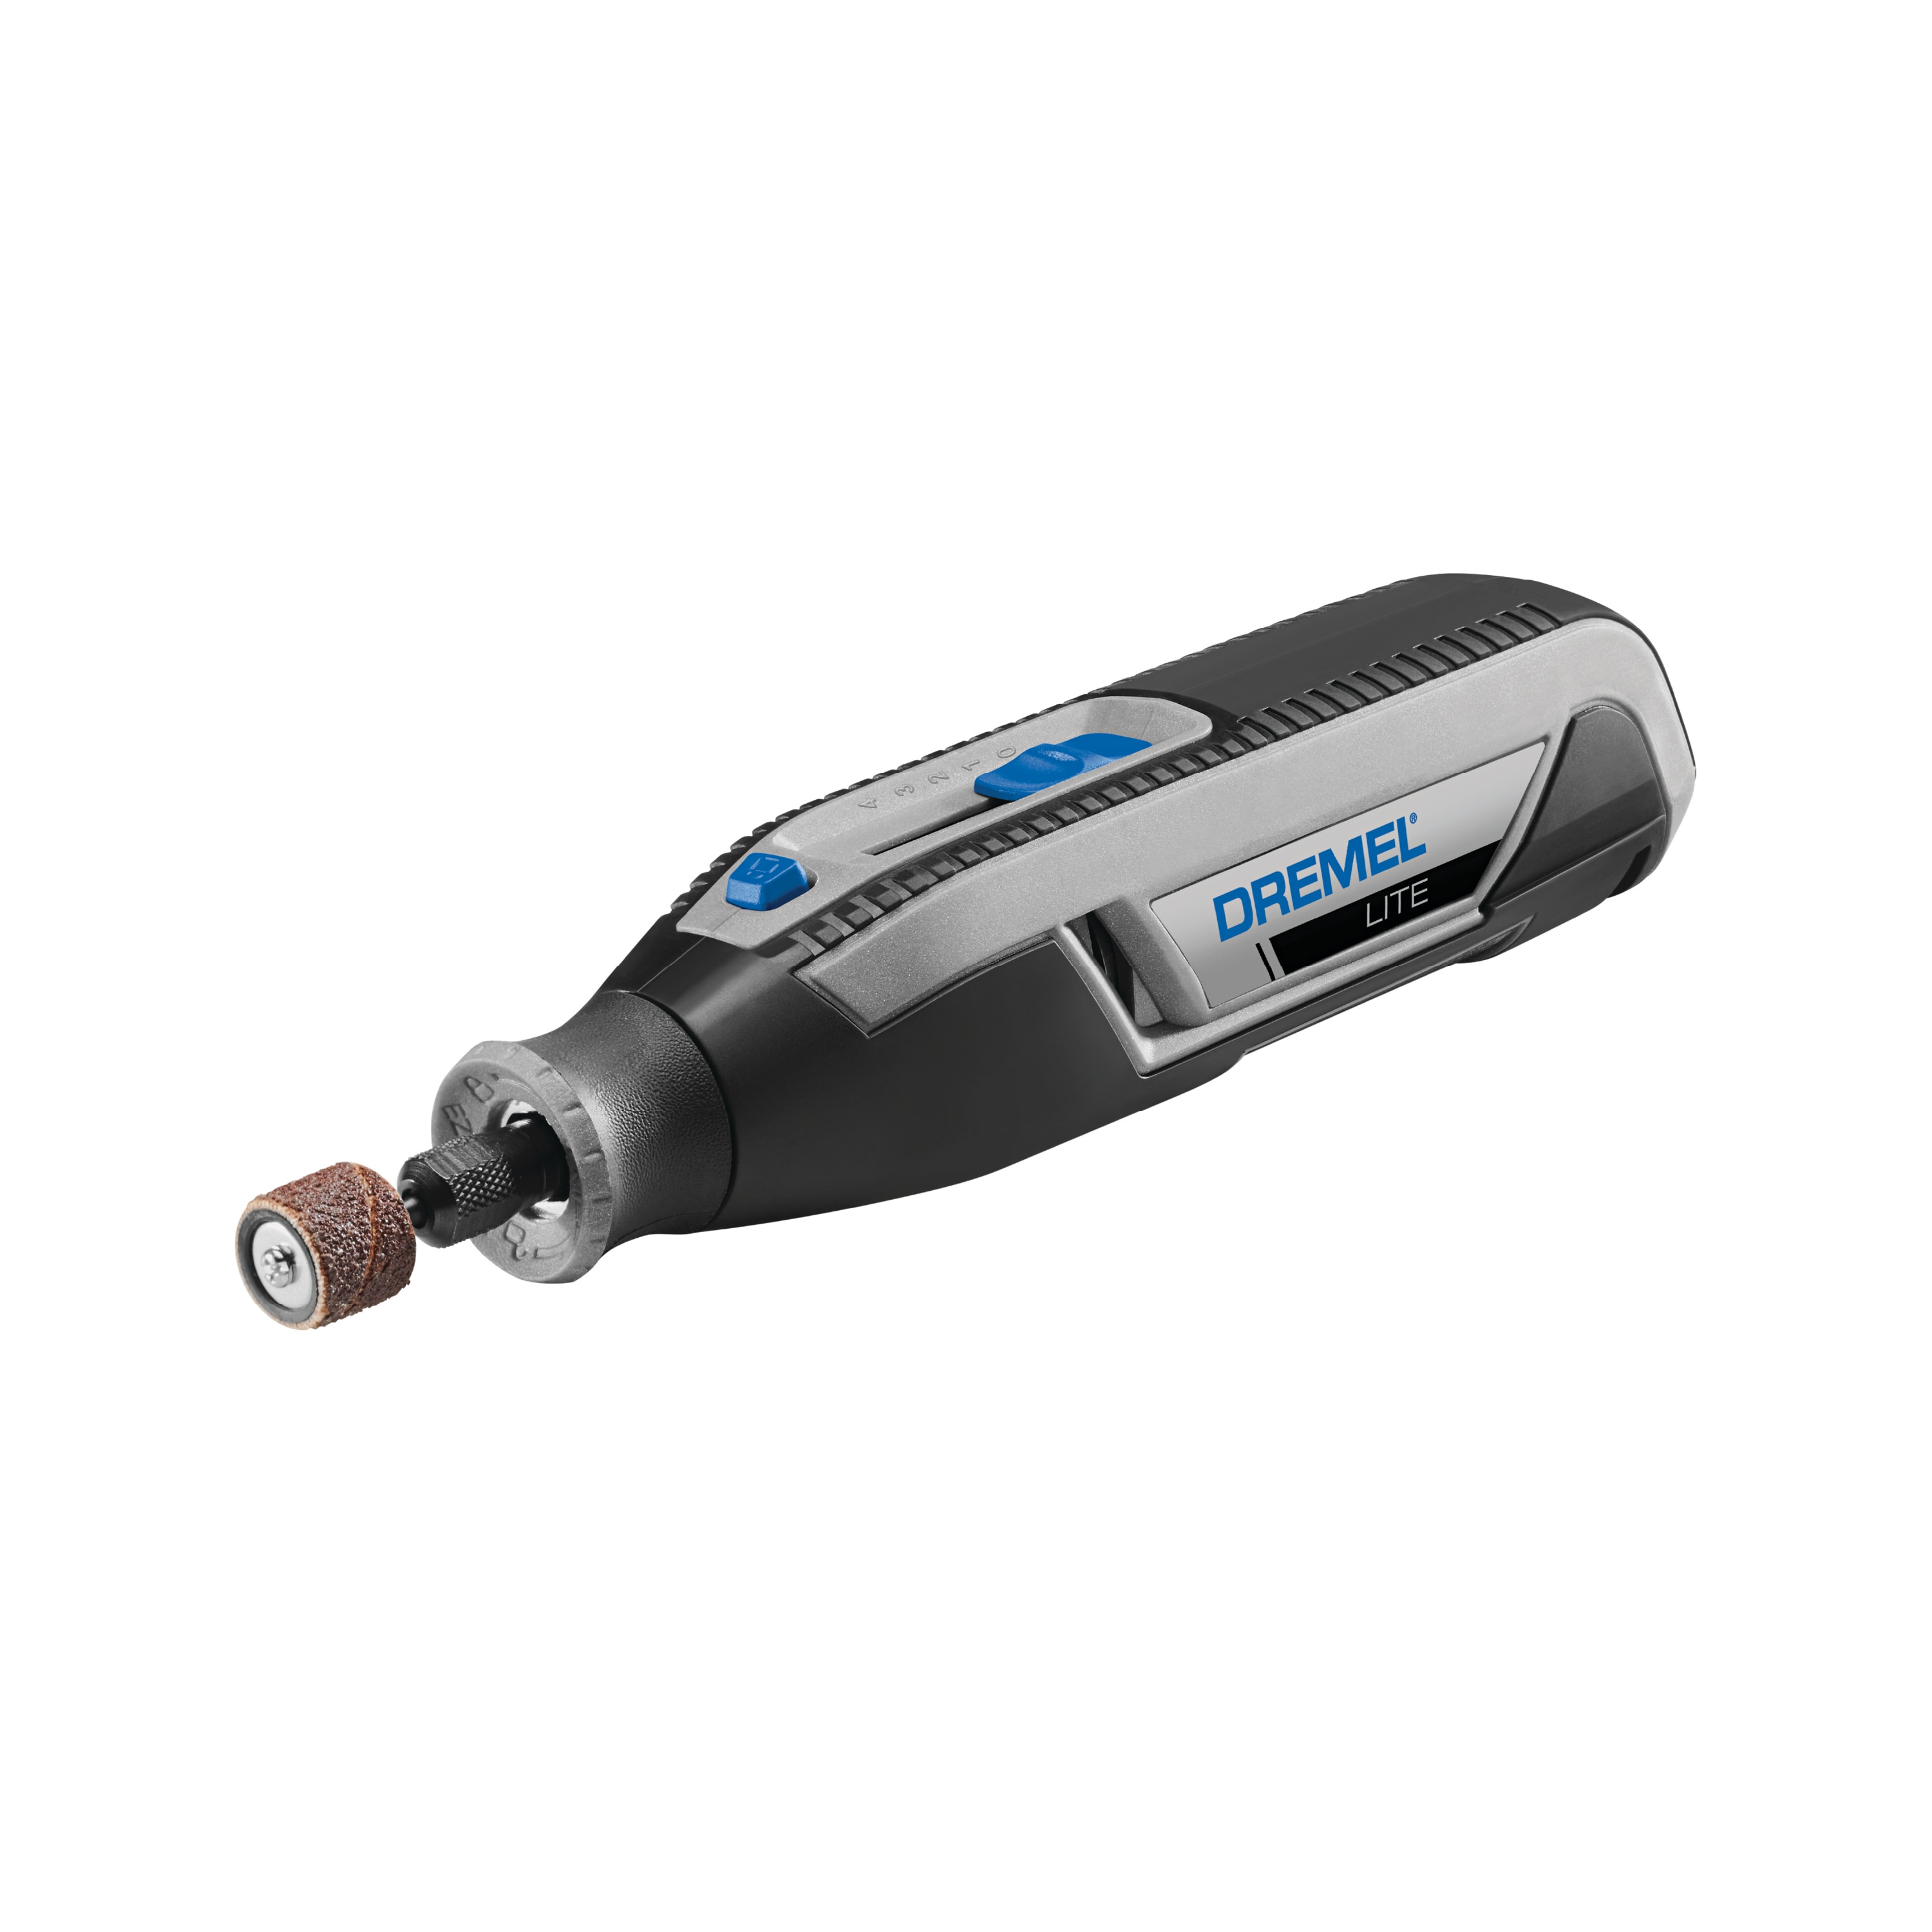 Introducing the Dremel 8240, Cordless 12-Volt Rotary Tool